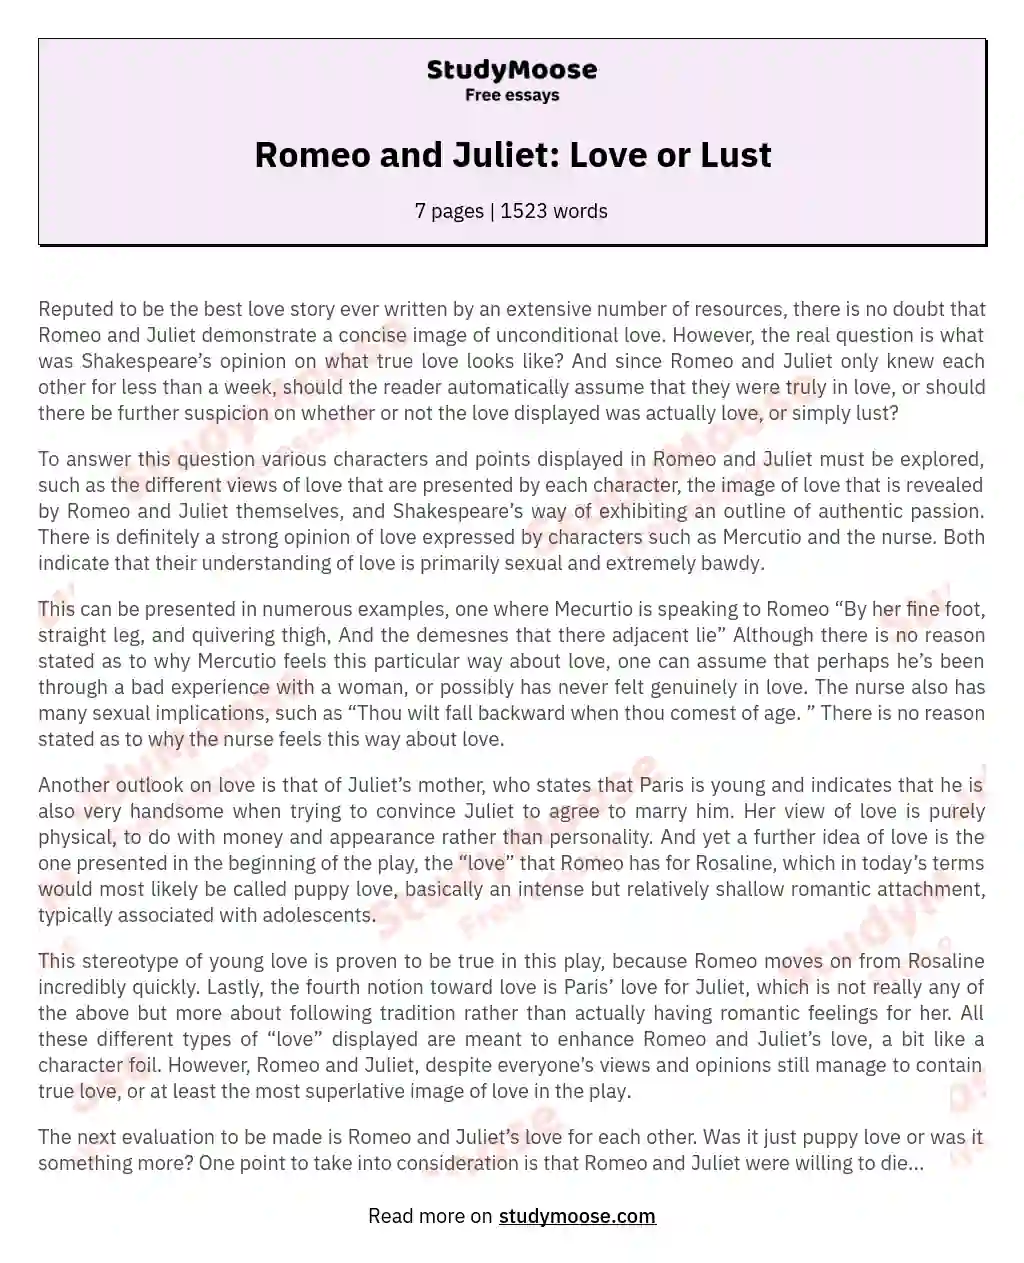 romeo and juliet essay about their love